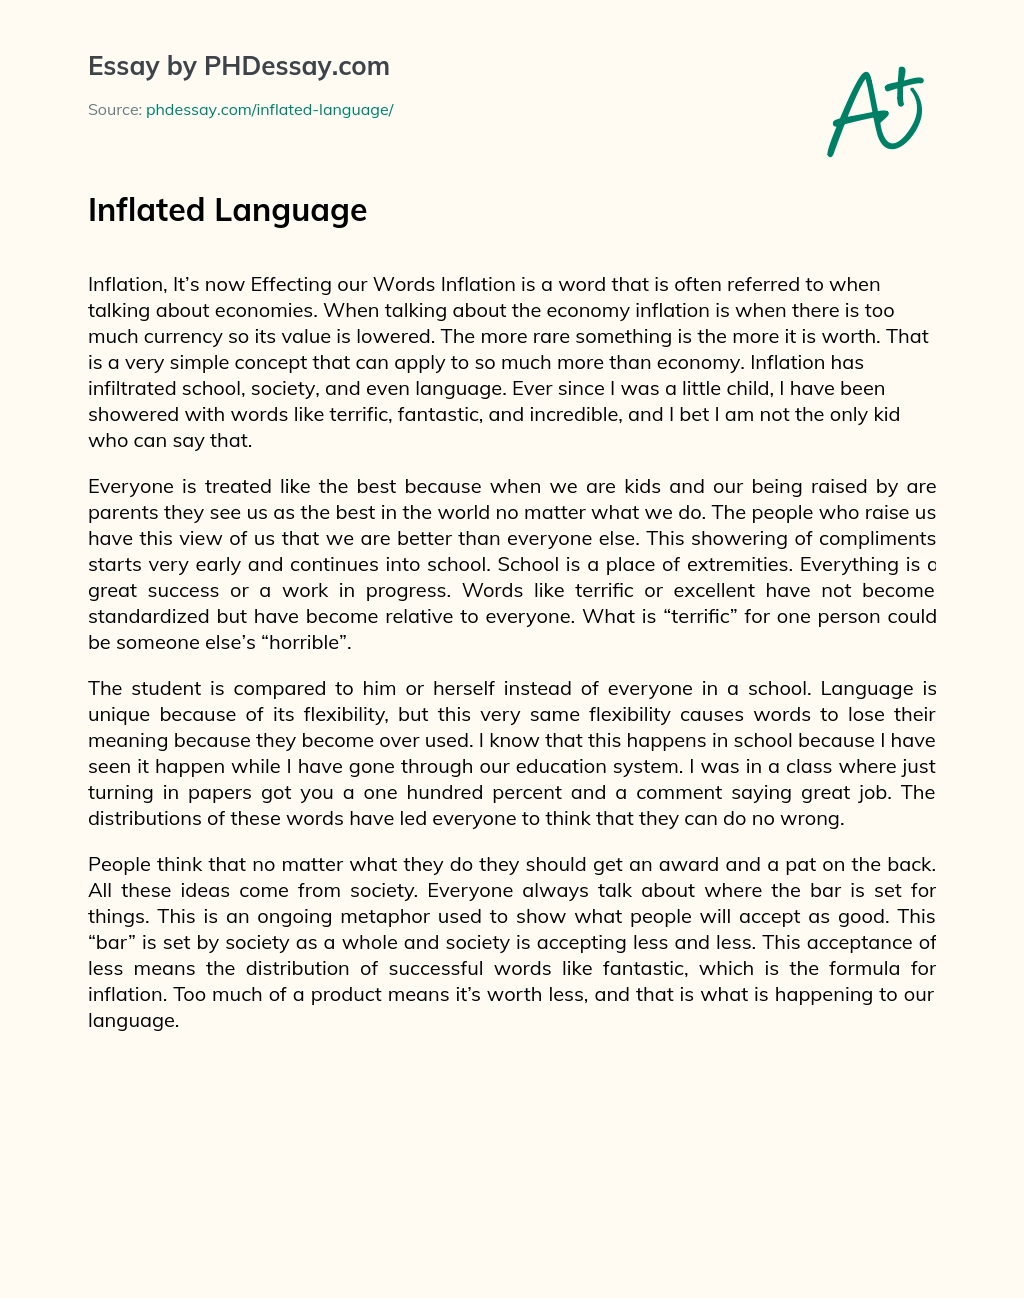 Inflated Language essay